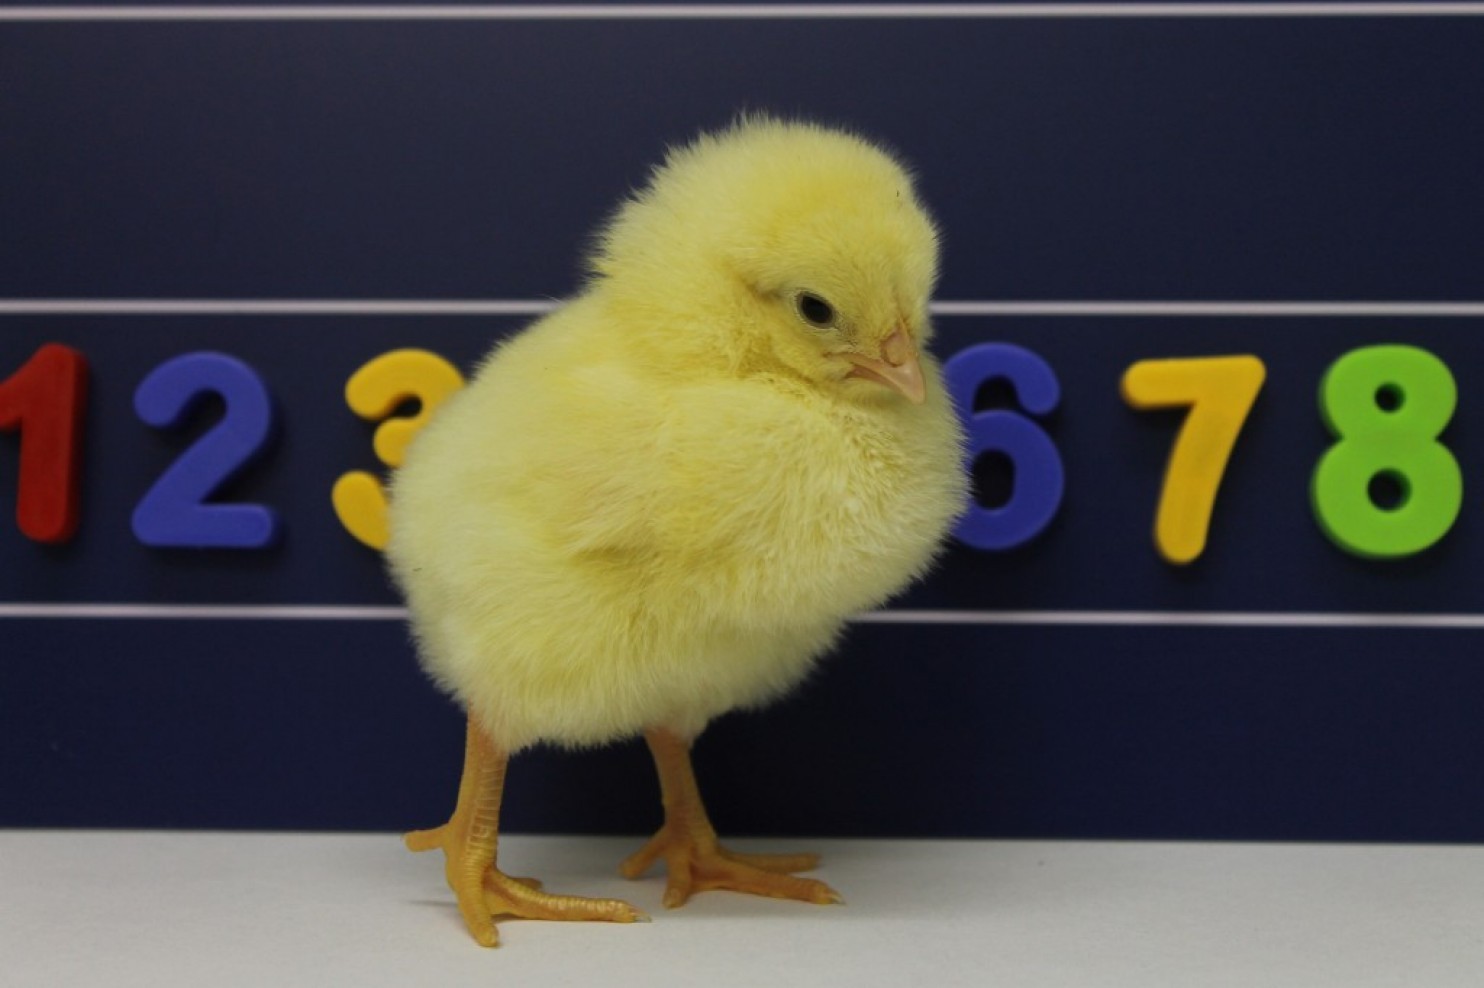 Counting chick